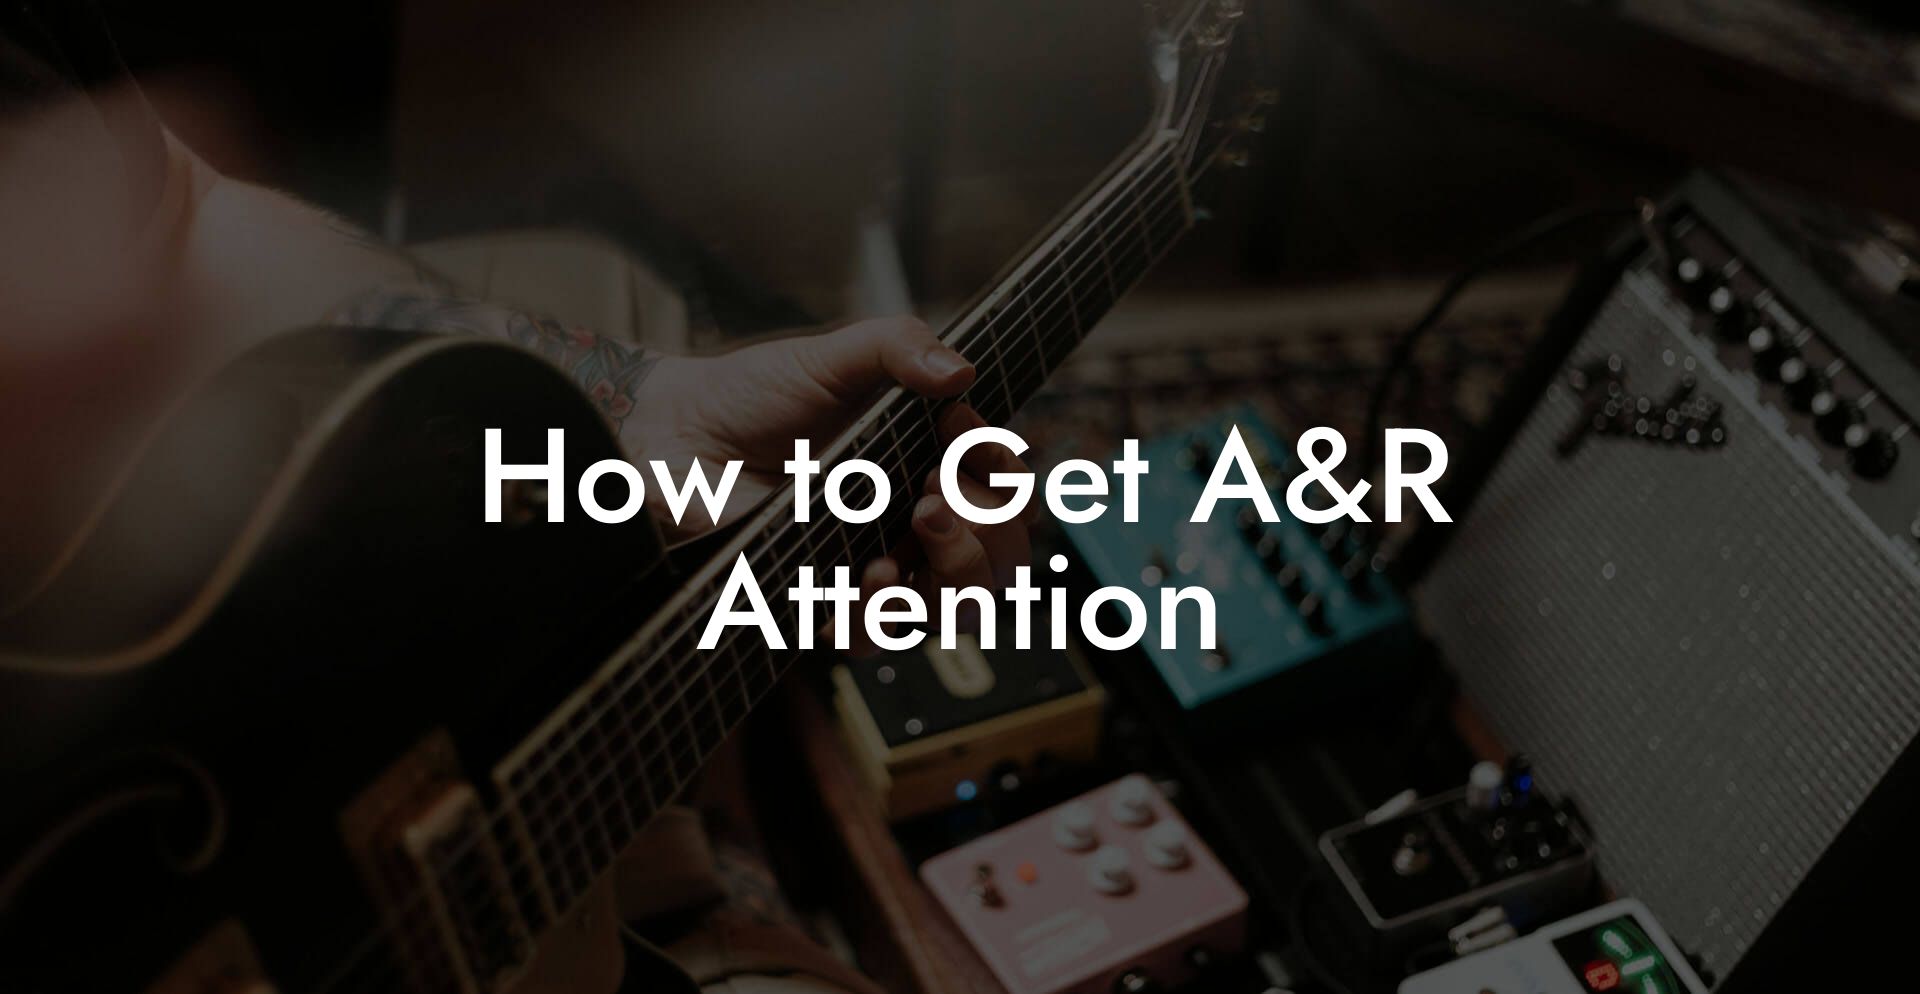 How to Get A&R Attention